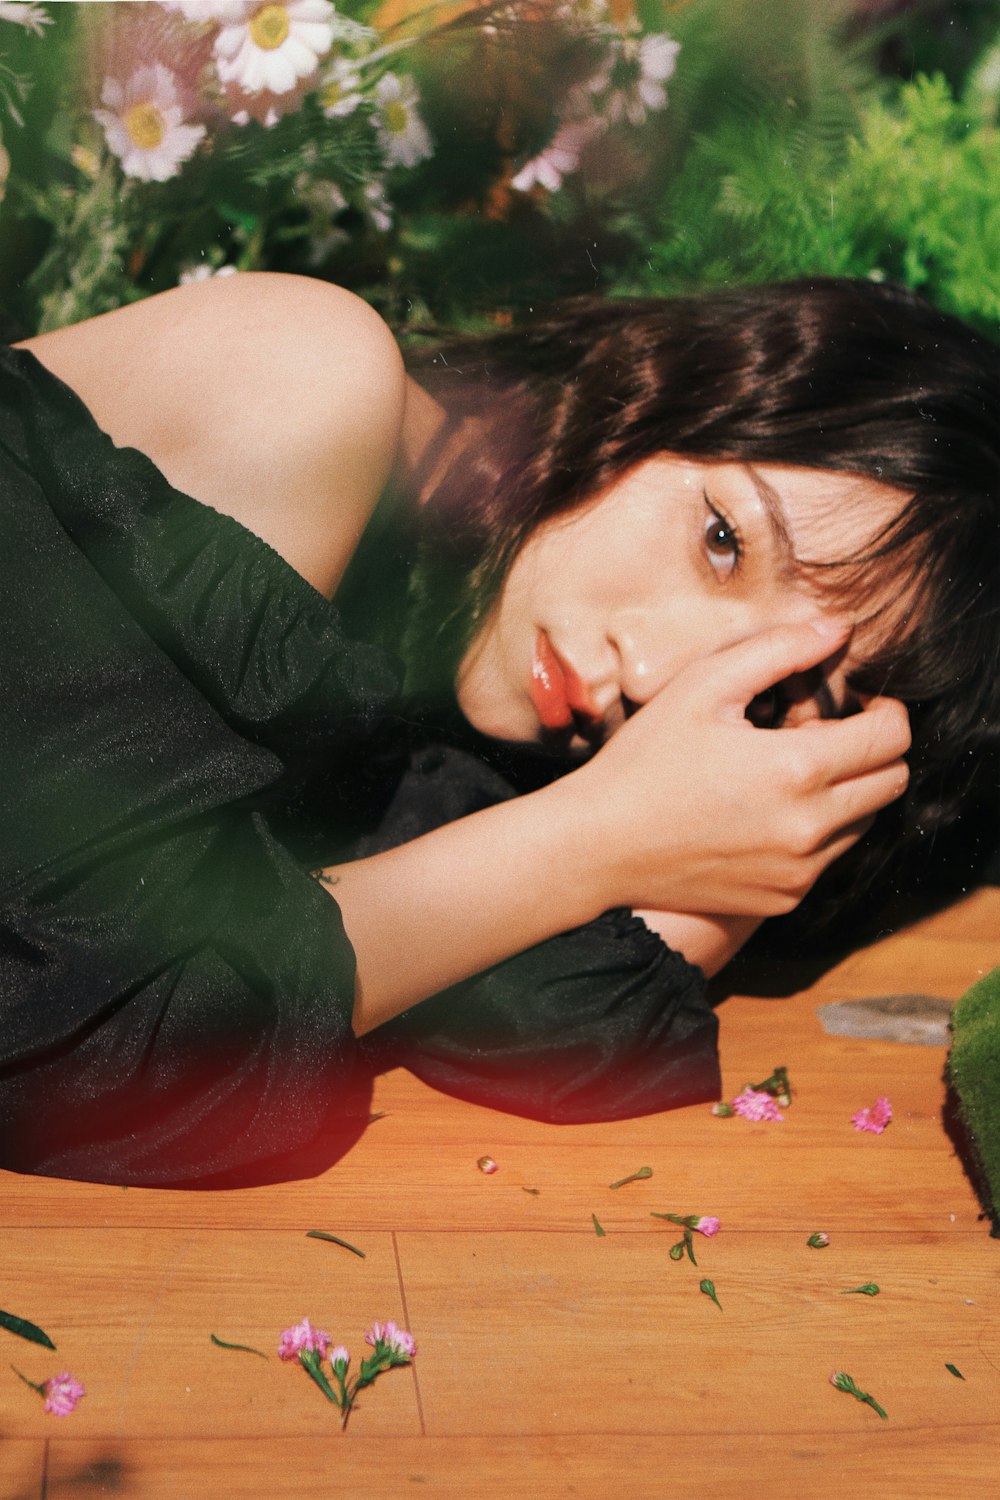 a woman laying on a wooden floor next to flowers